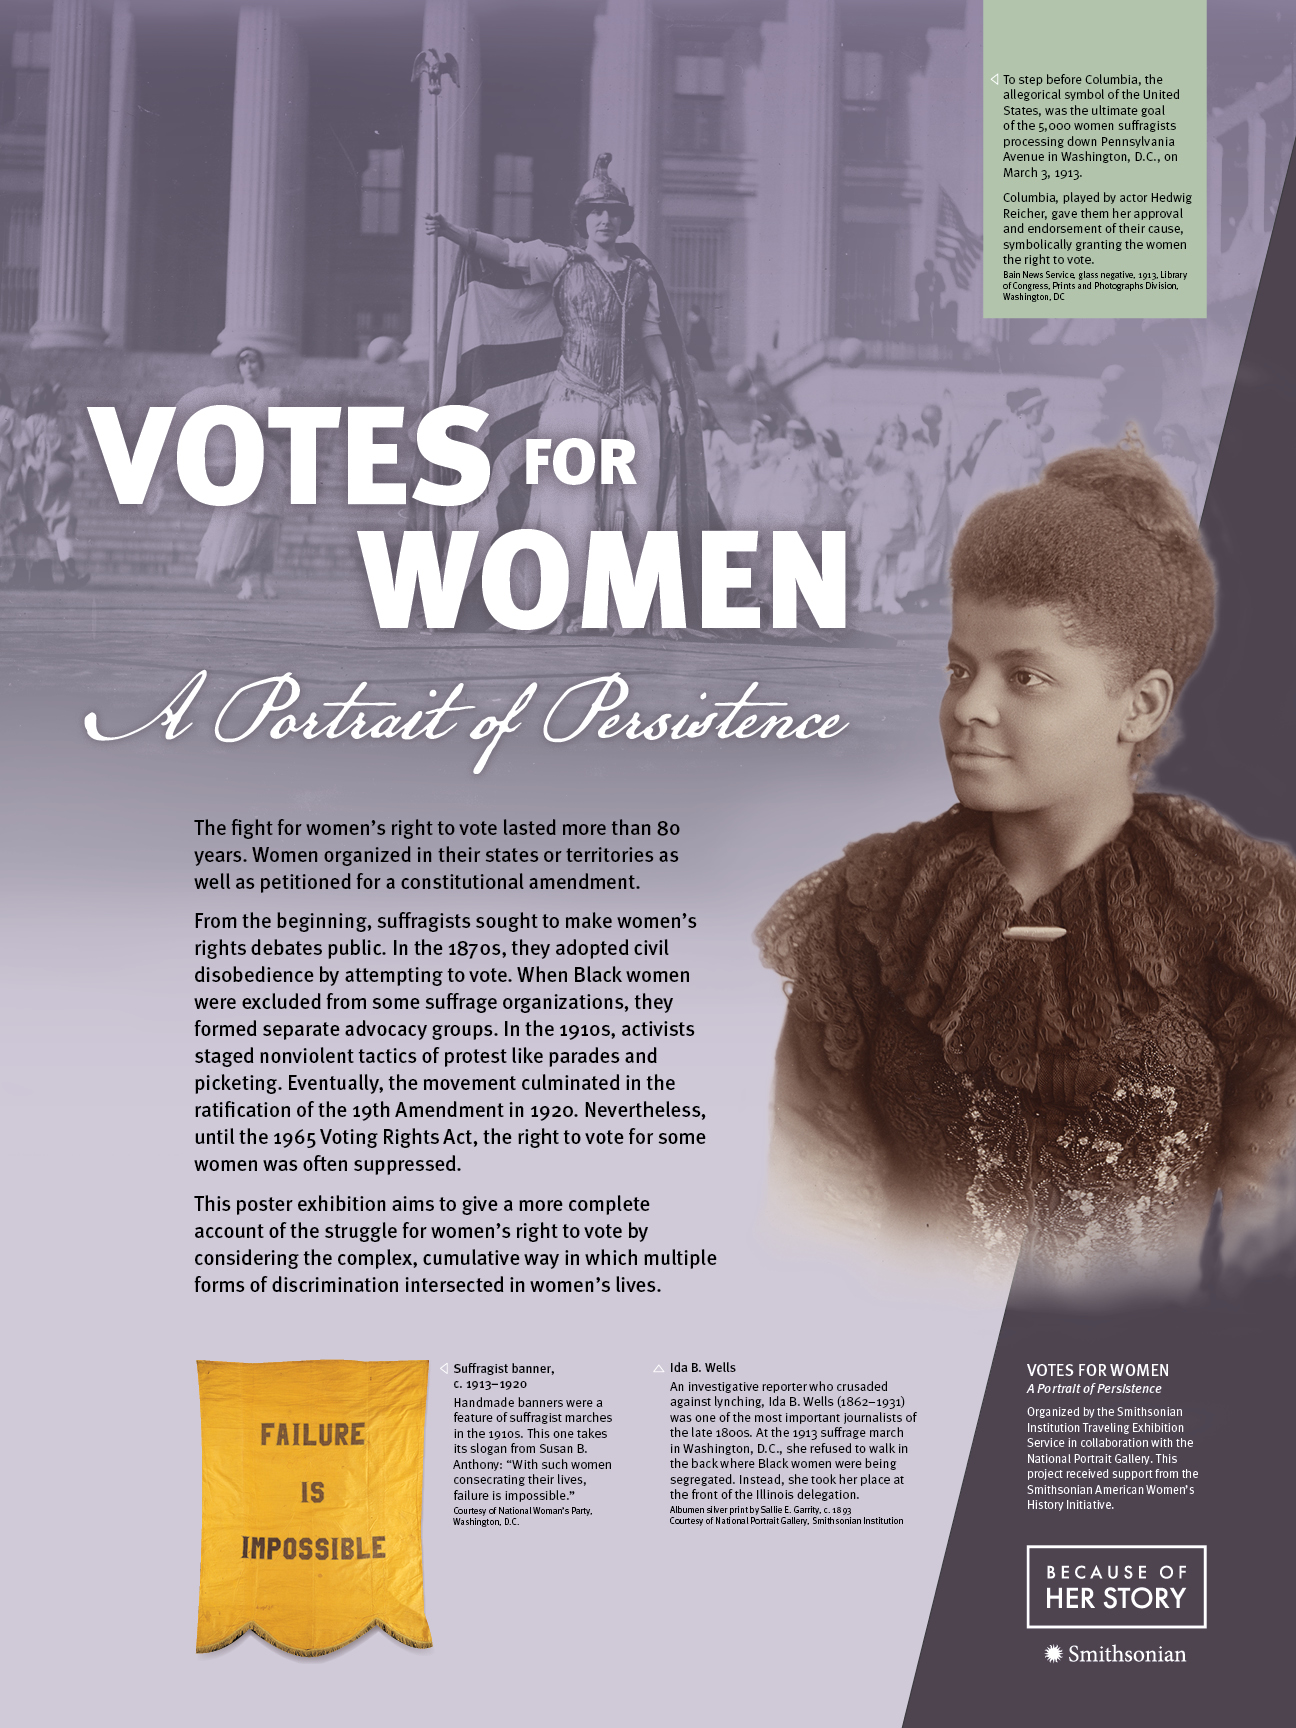 Celebrate the centennial of women's suffrage in the U.S. with 'Votes for Women: A Portrait of Persistence'